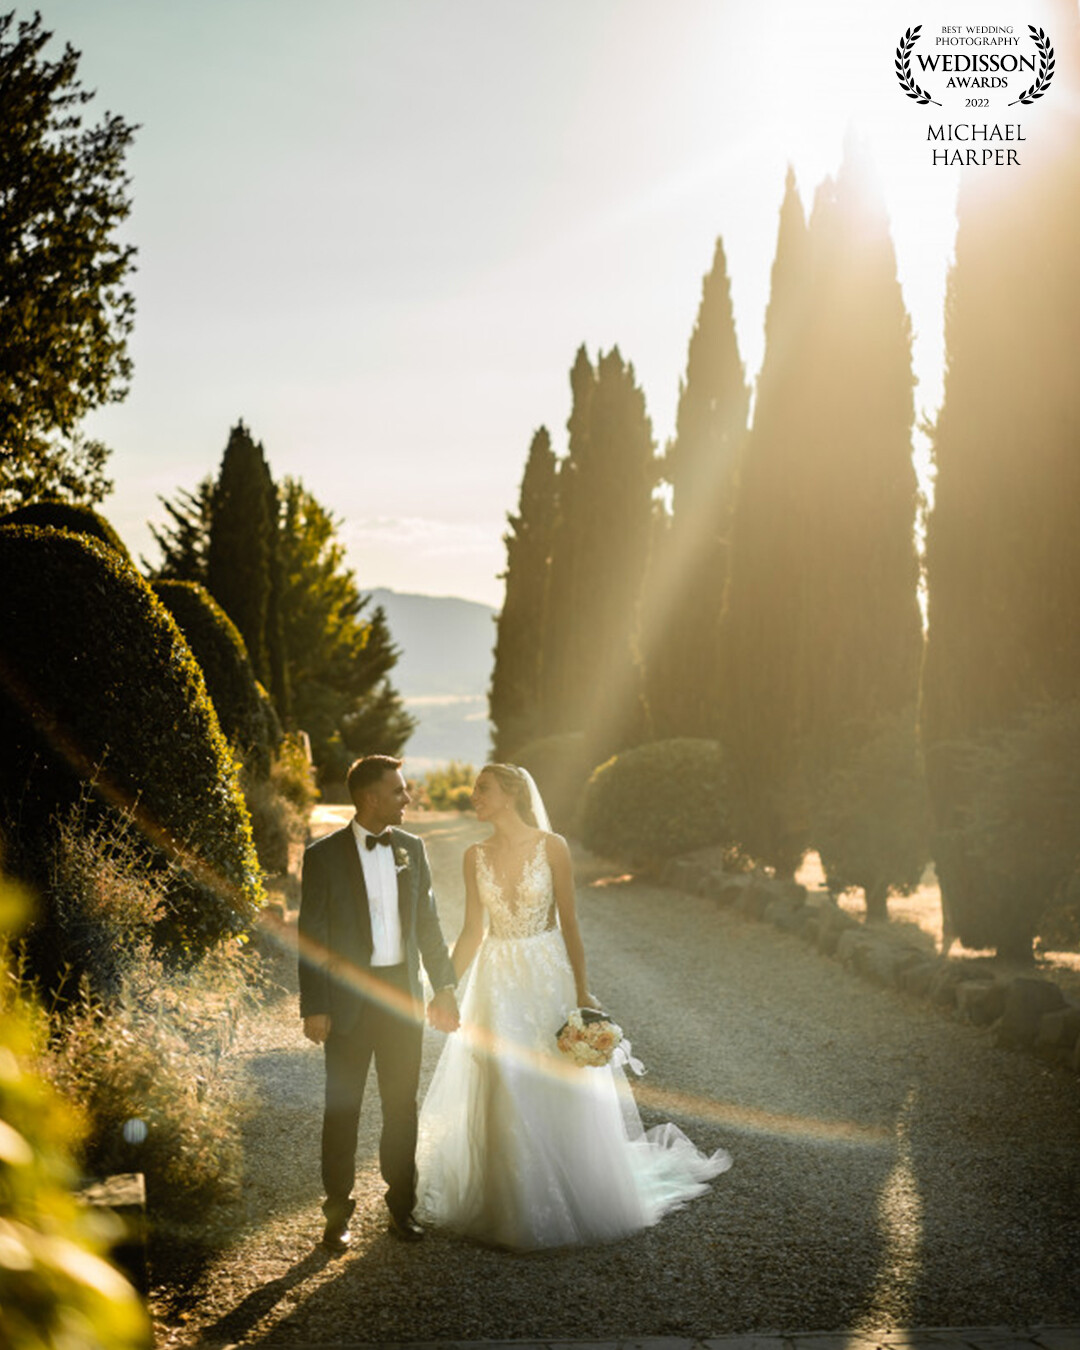 Captured in Tuscany as the sun slowly set. We took a slow walk down a tree-lined path and using an ND filter the sun was free to flare like crazy creating lots of cool effects!